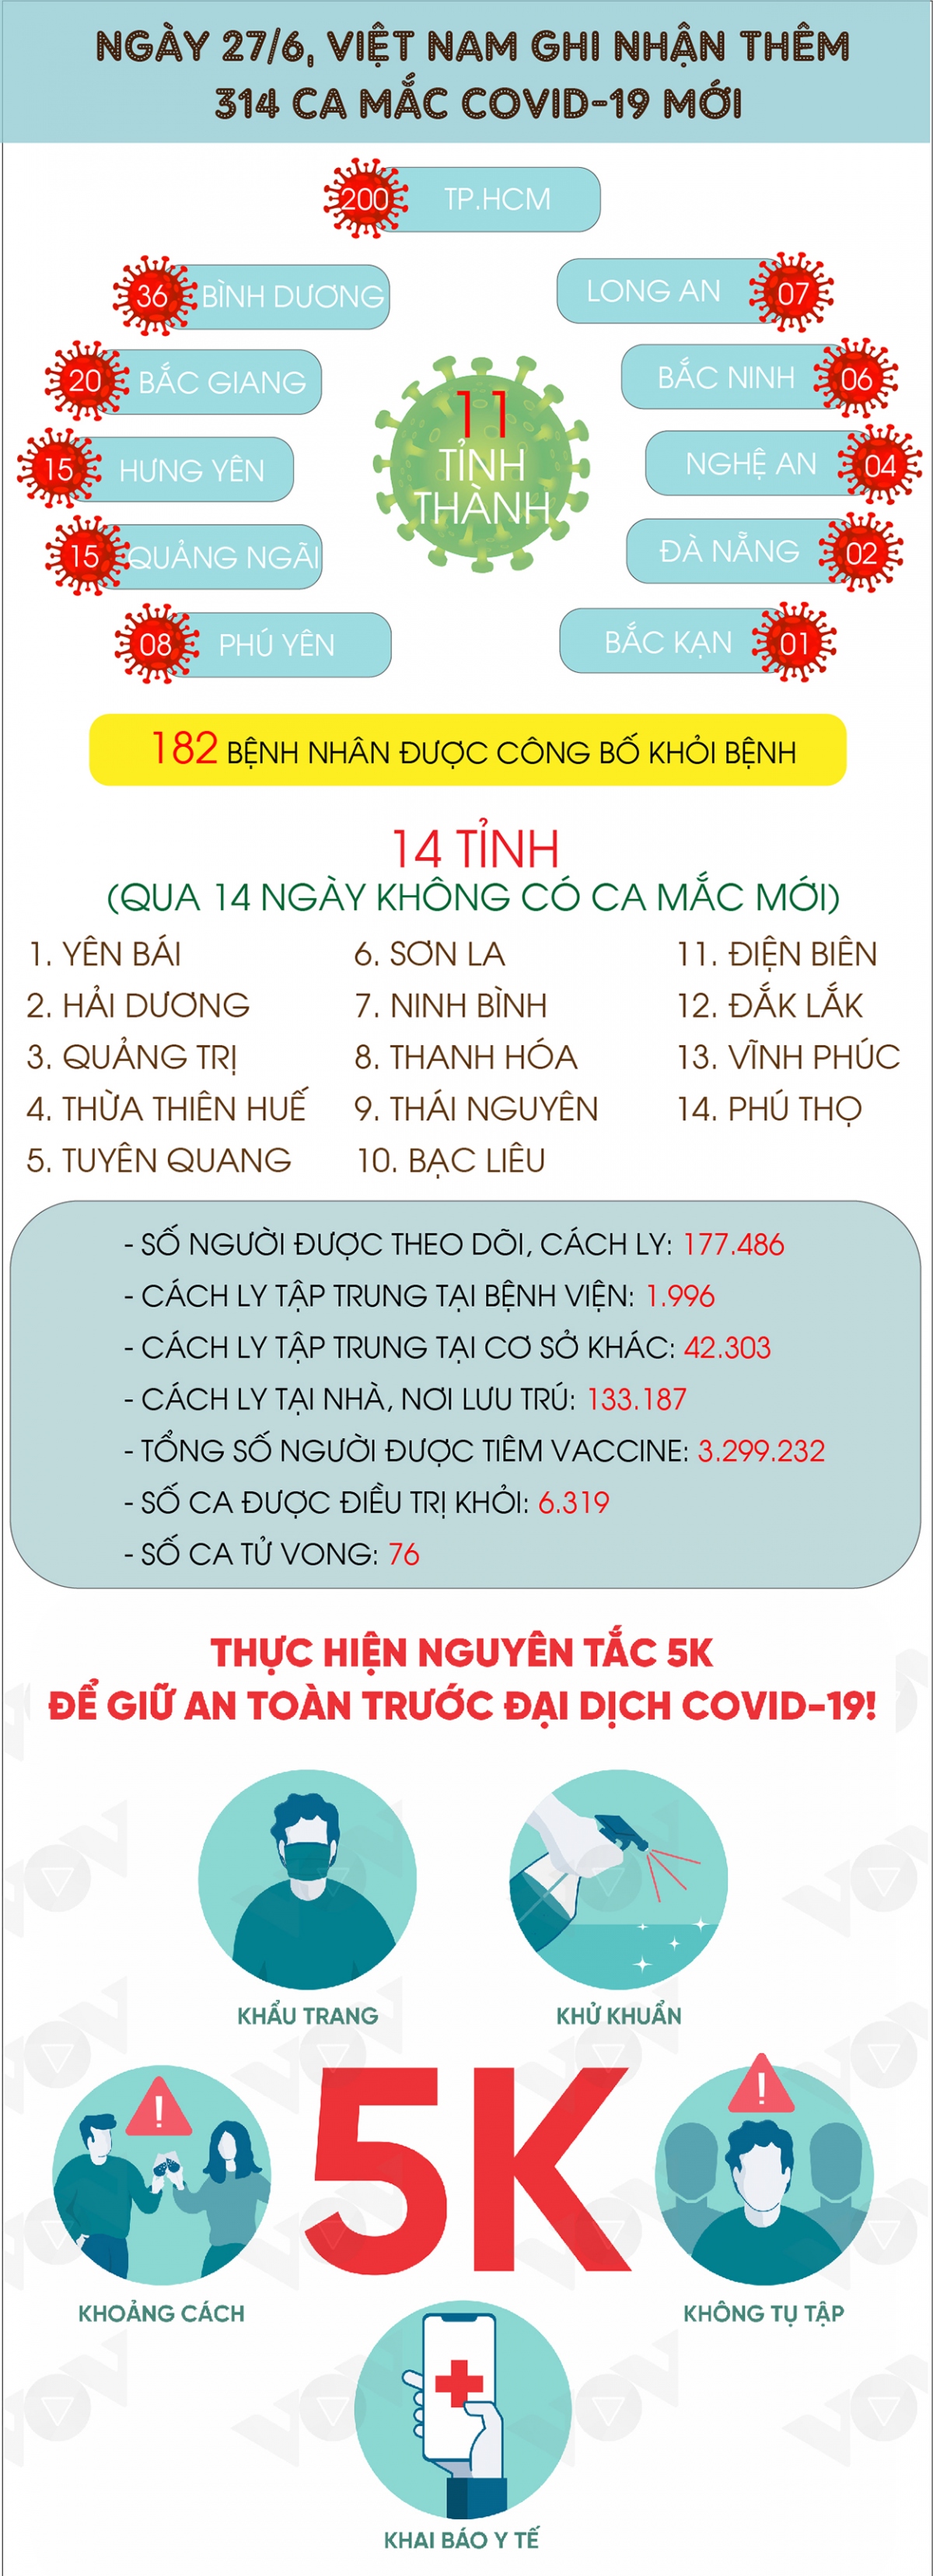 ngay 27 6, co them 314 ca mac covid-19 moi trong nuoc, rieng tp.hcm 200 ca hinh anh 1